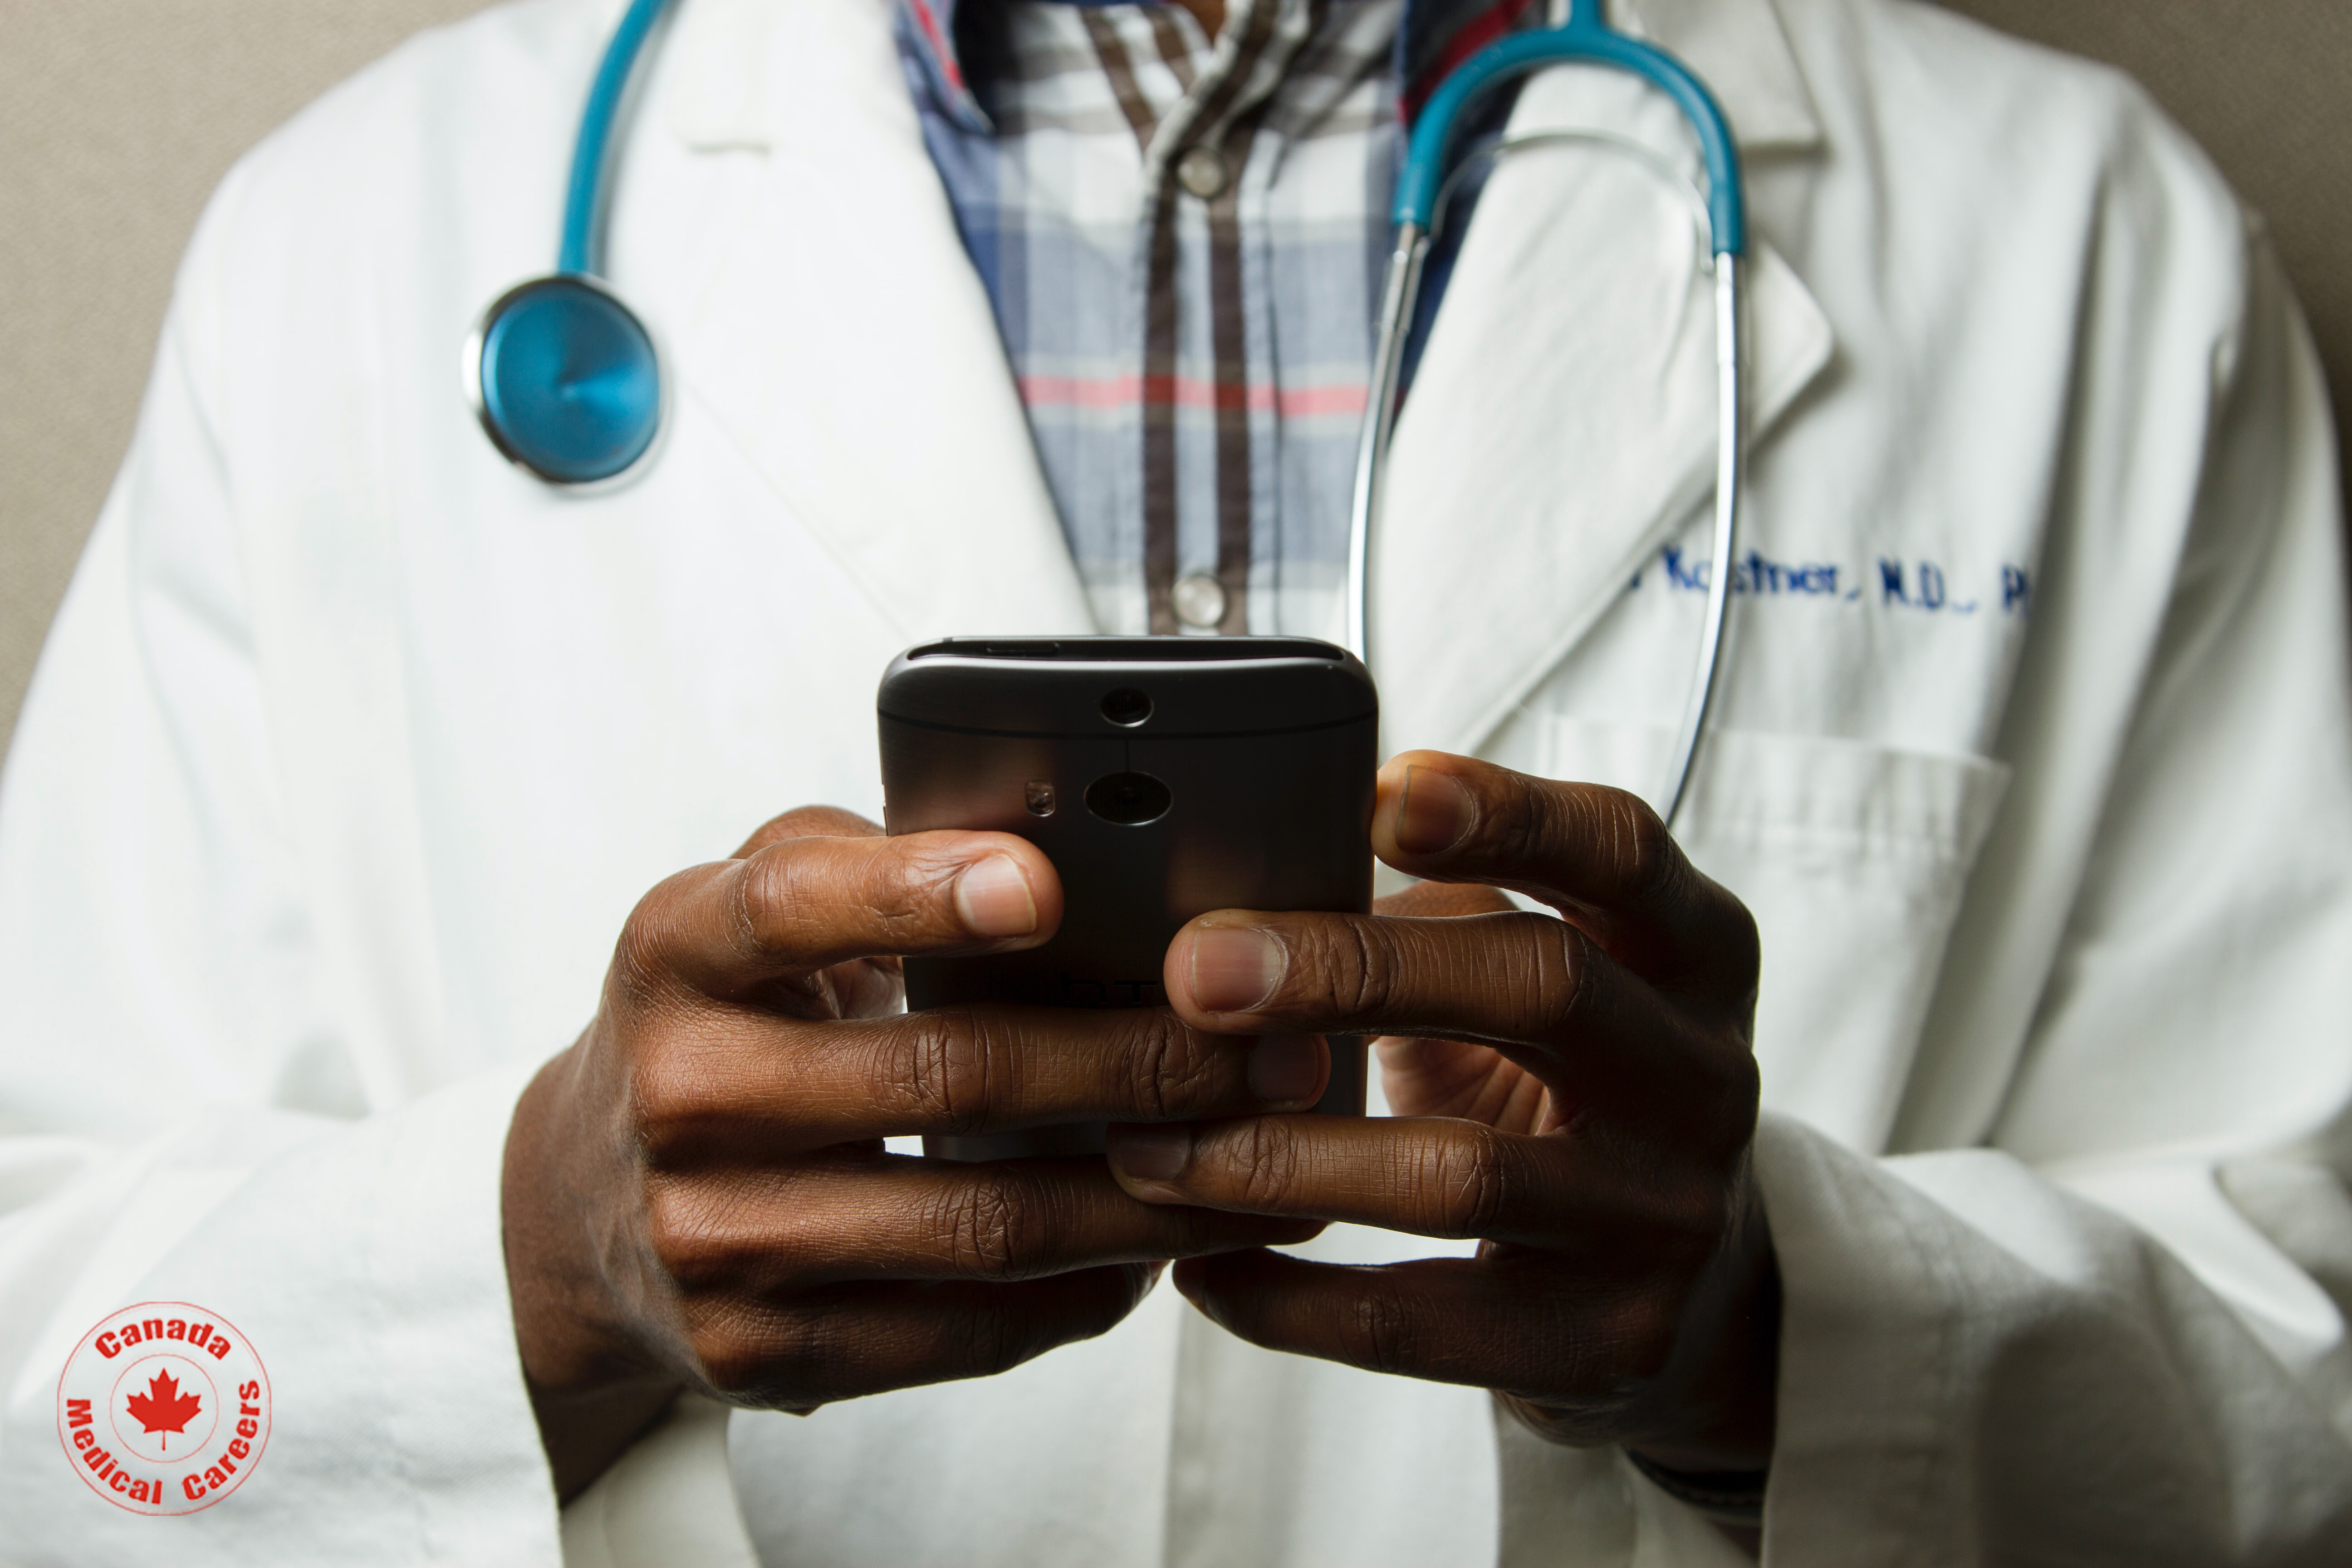 A doctor holding a phone